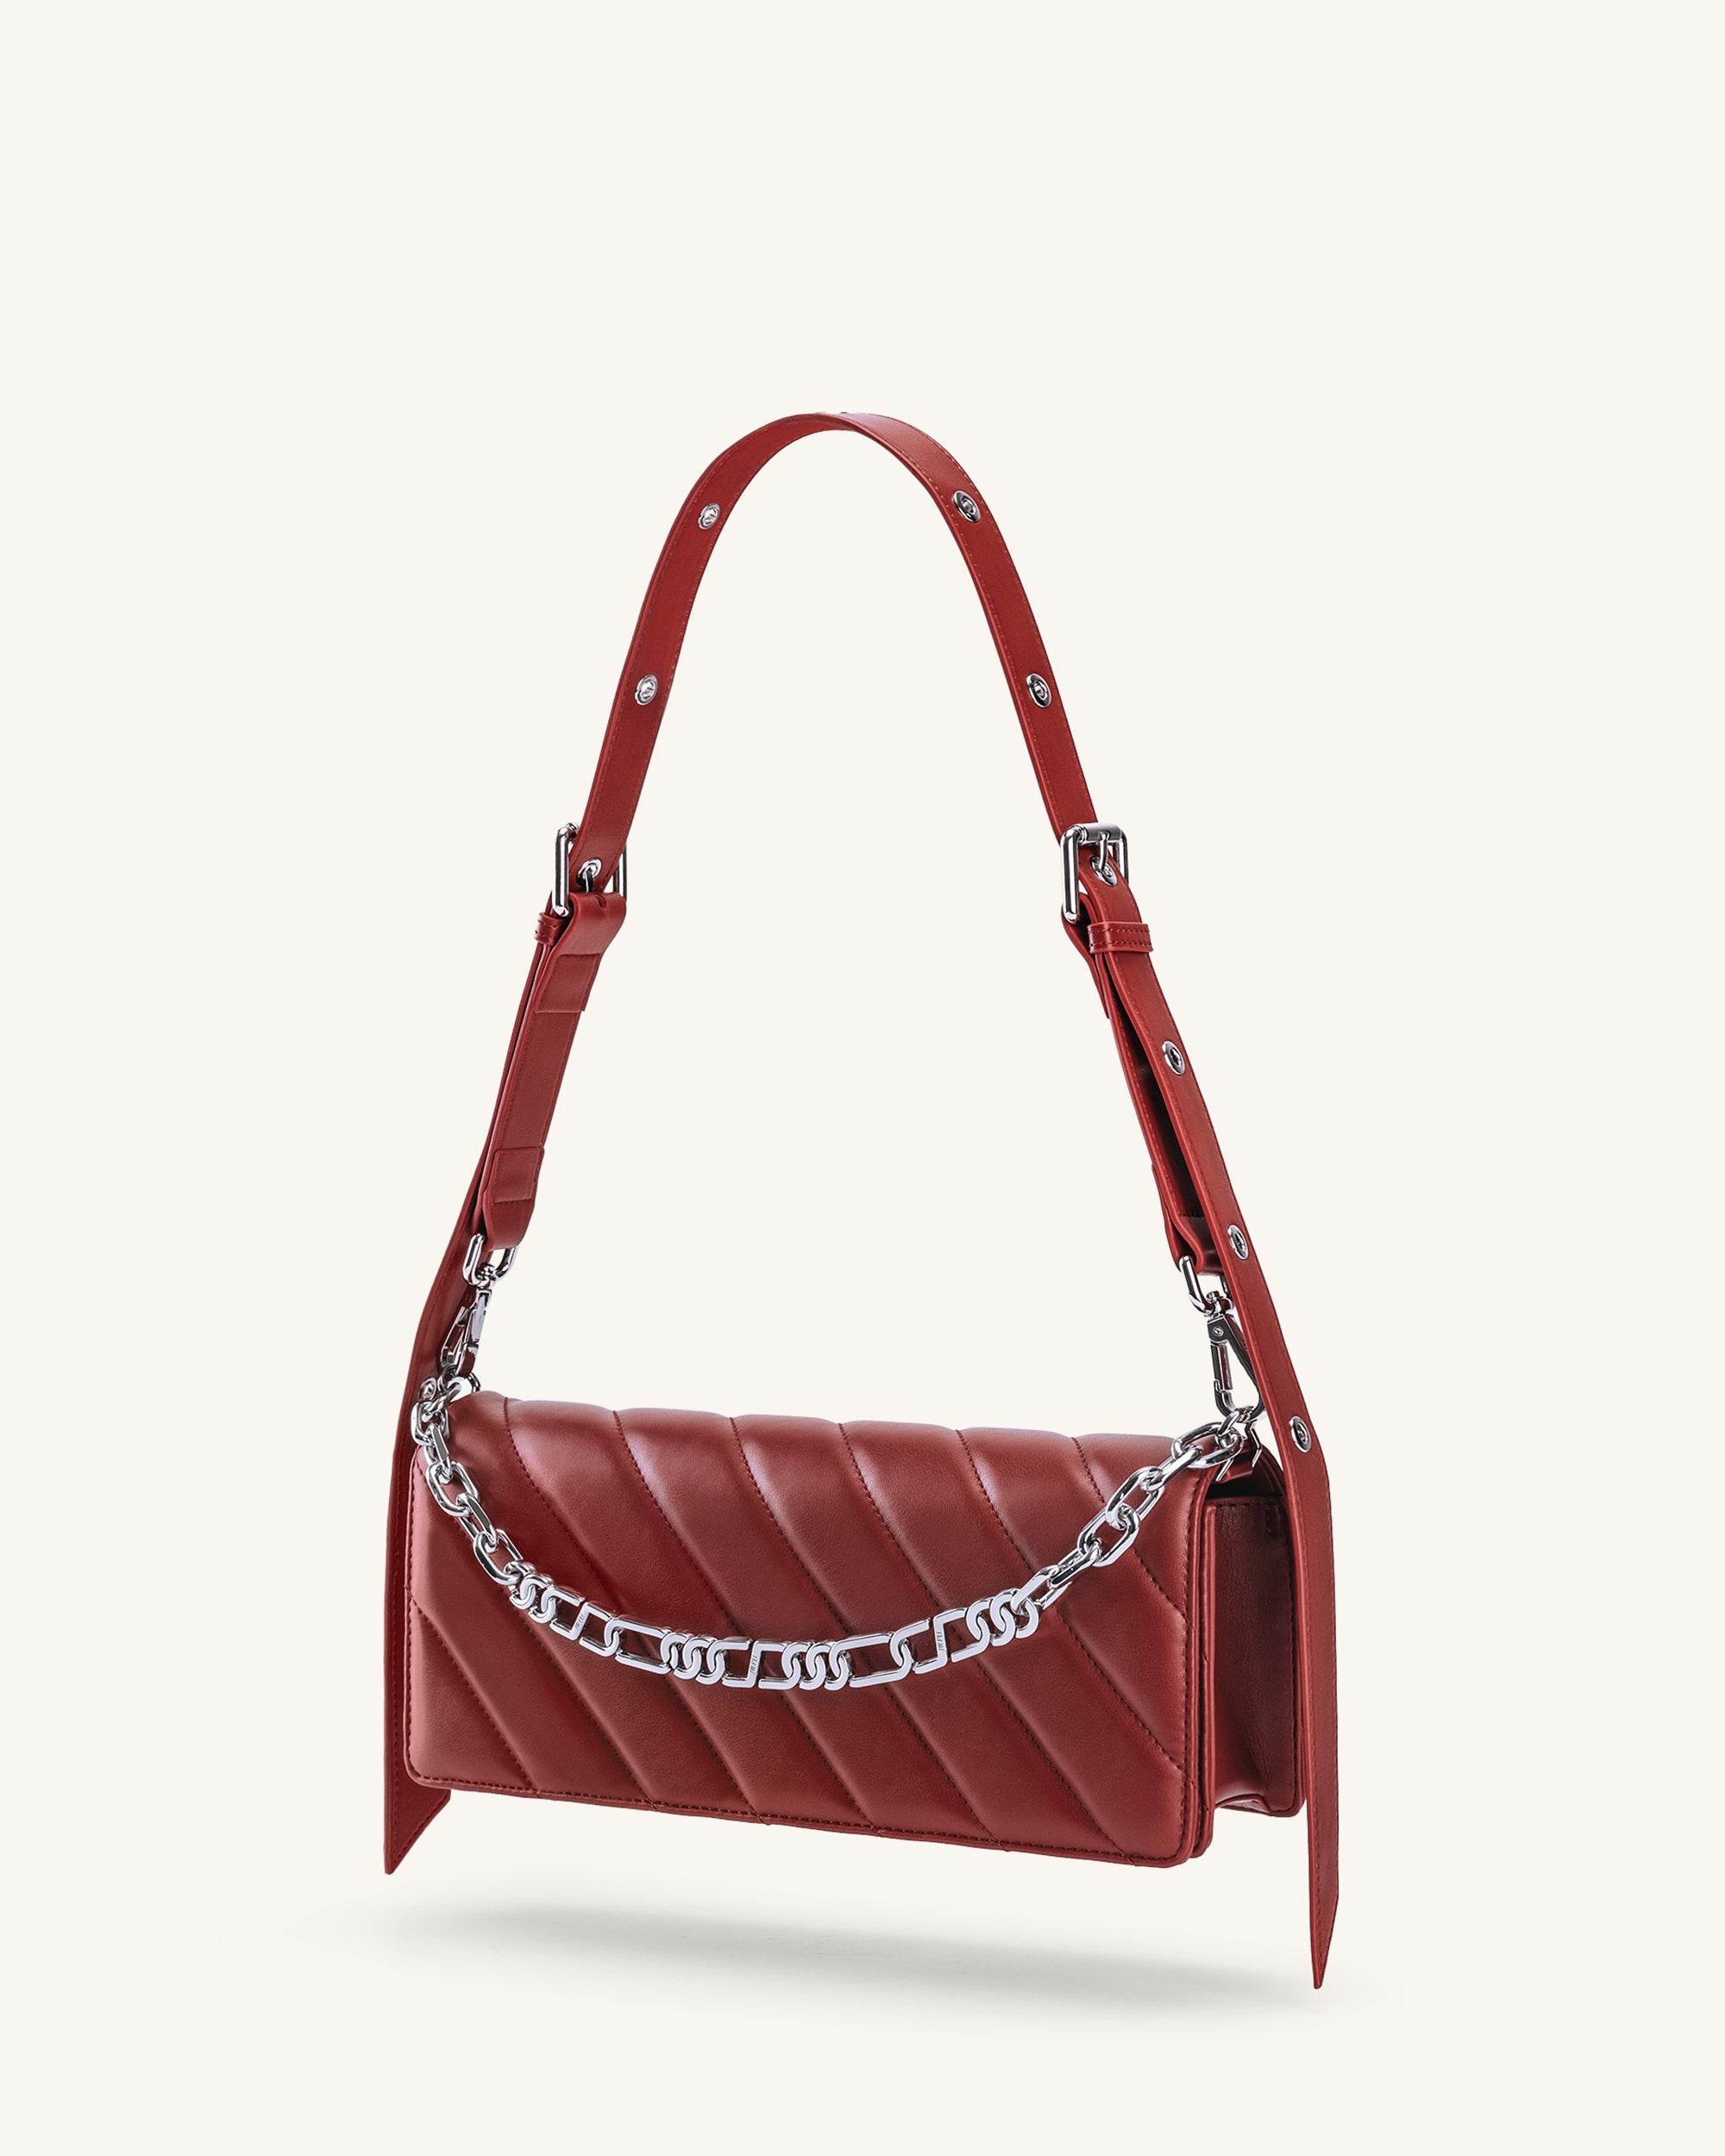 Licia Quilted Small Shoulder Bag